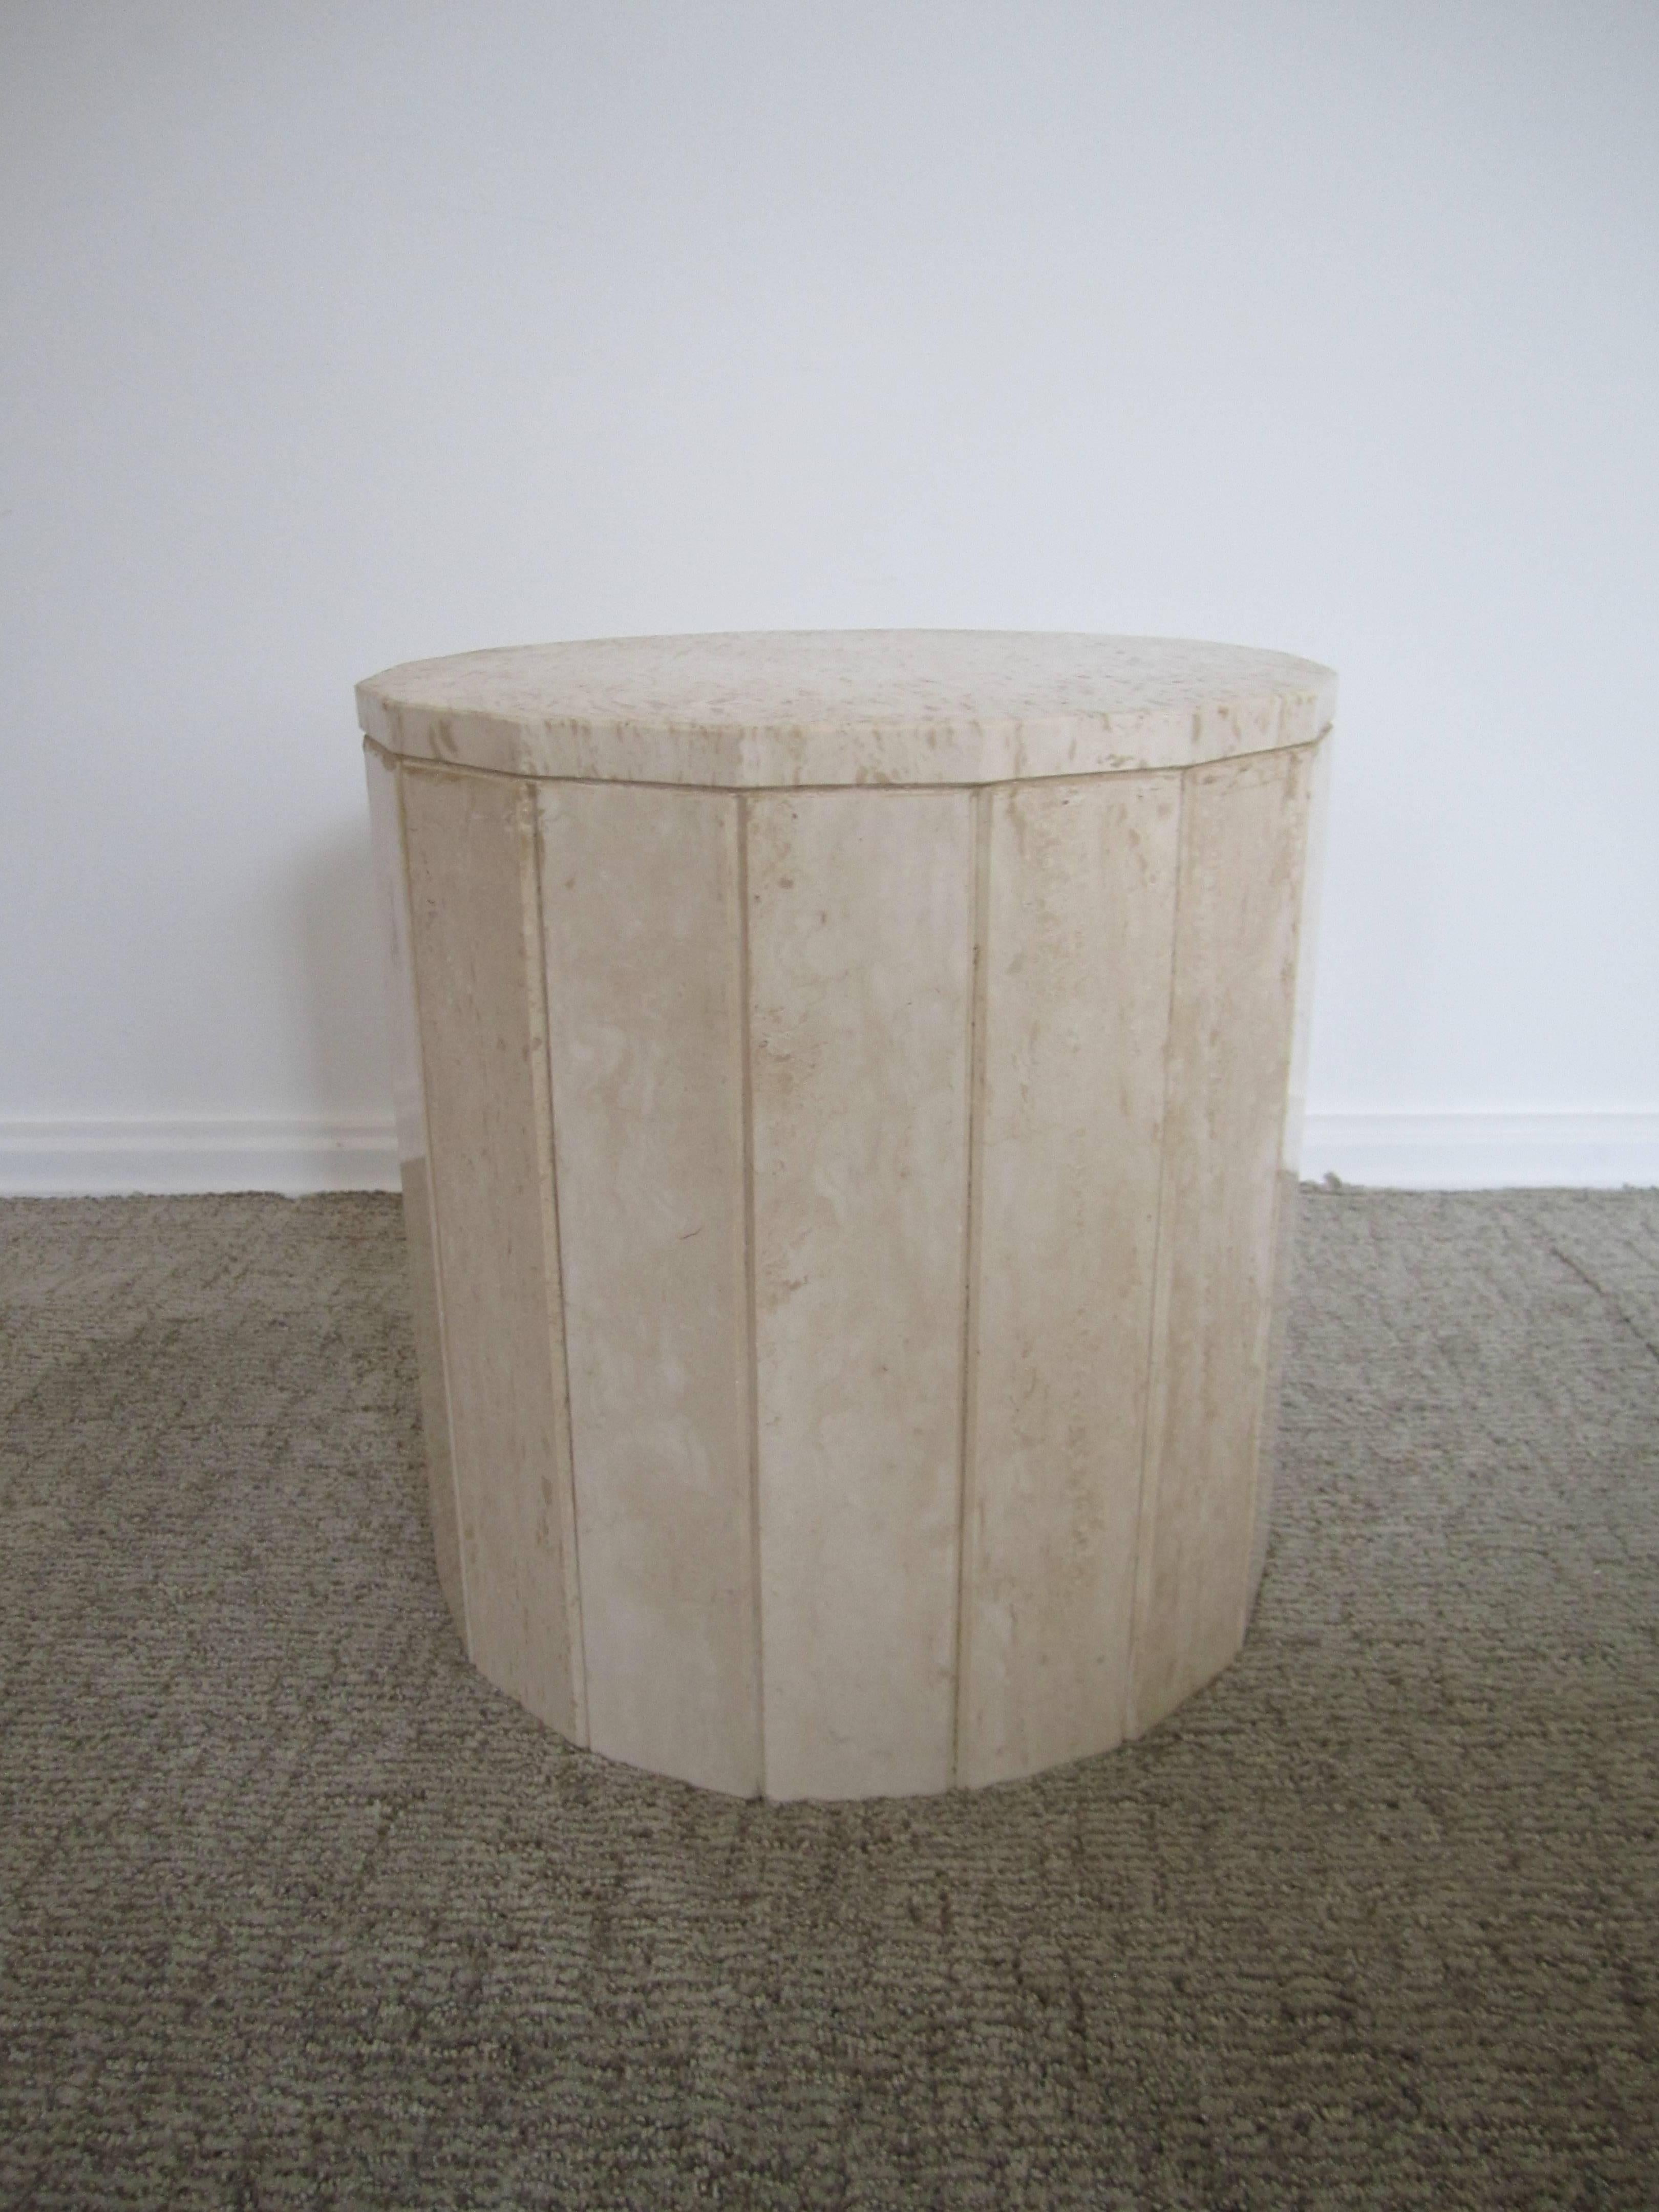 A substantial Italian travertine marble Modern style round side table or pedestal table, circa late-20th century, Italy. Travertine is 'beige' or 'sand' in color. Side table has a 'hexadecagon' shape of 16 sides. Table is very substantial so it can